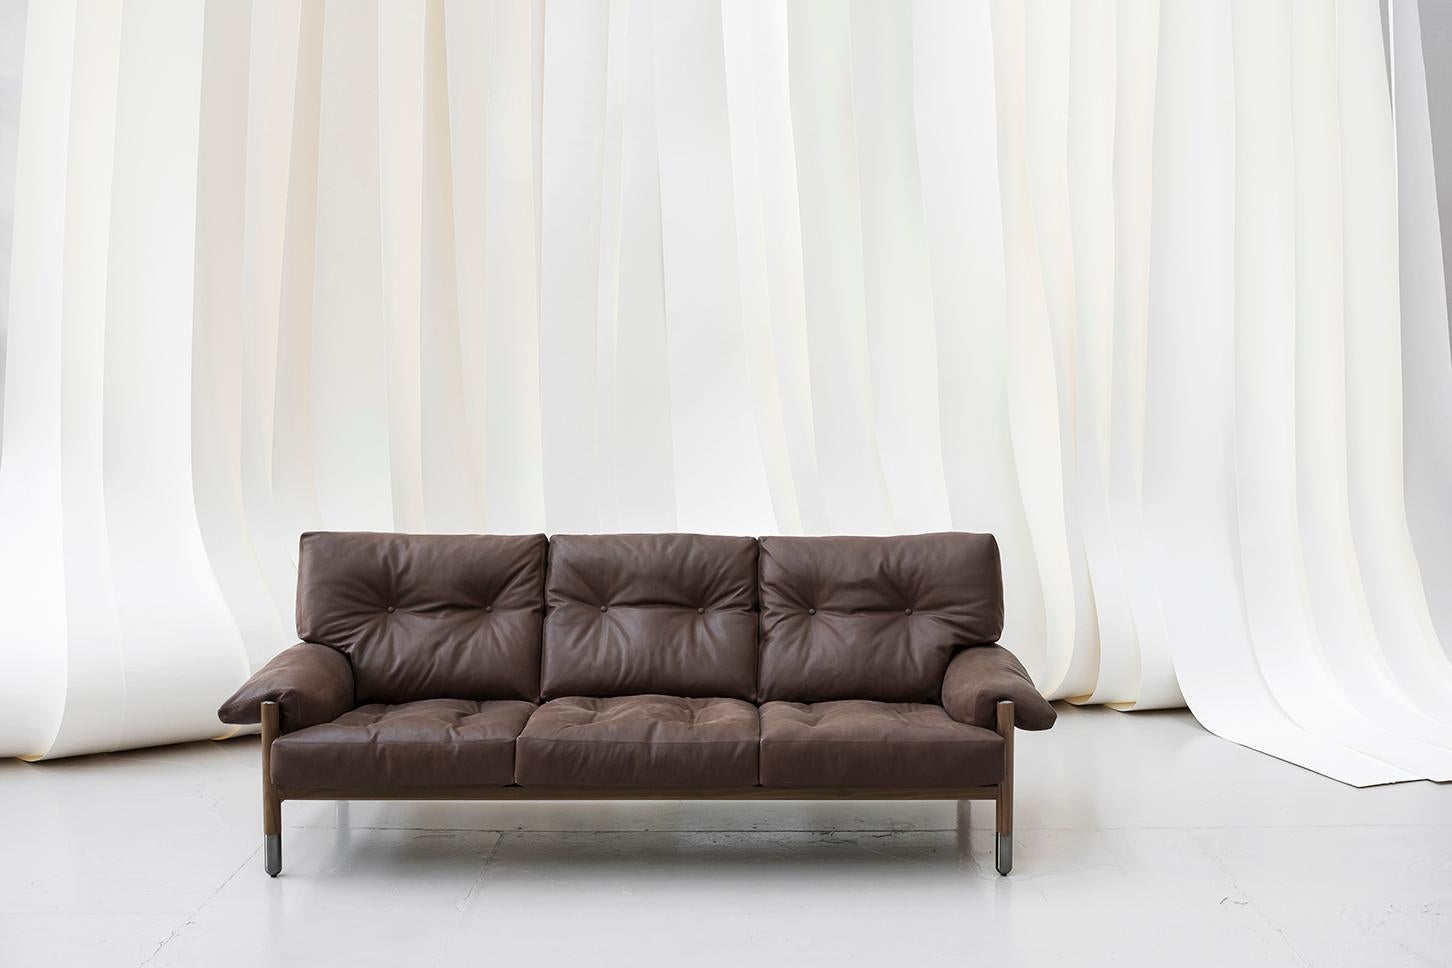 The highly elegant sofa is made using the very finest of materials: exposed walnut, elegant metal chromed details finish shiny black and belts for the support of the backrest in refined natural leather. The cushions are filled with feathers and the